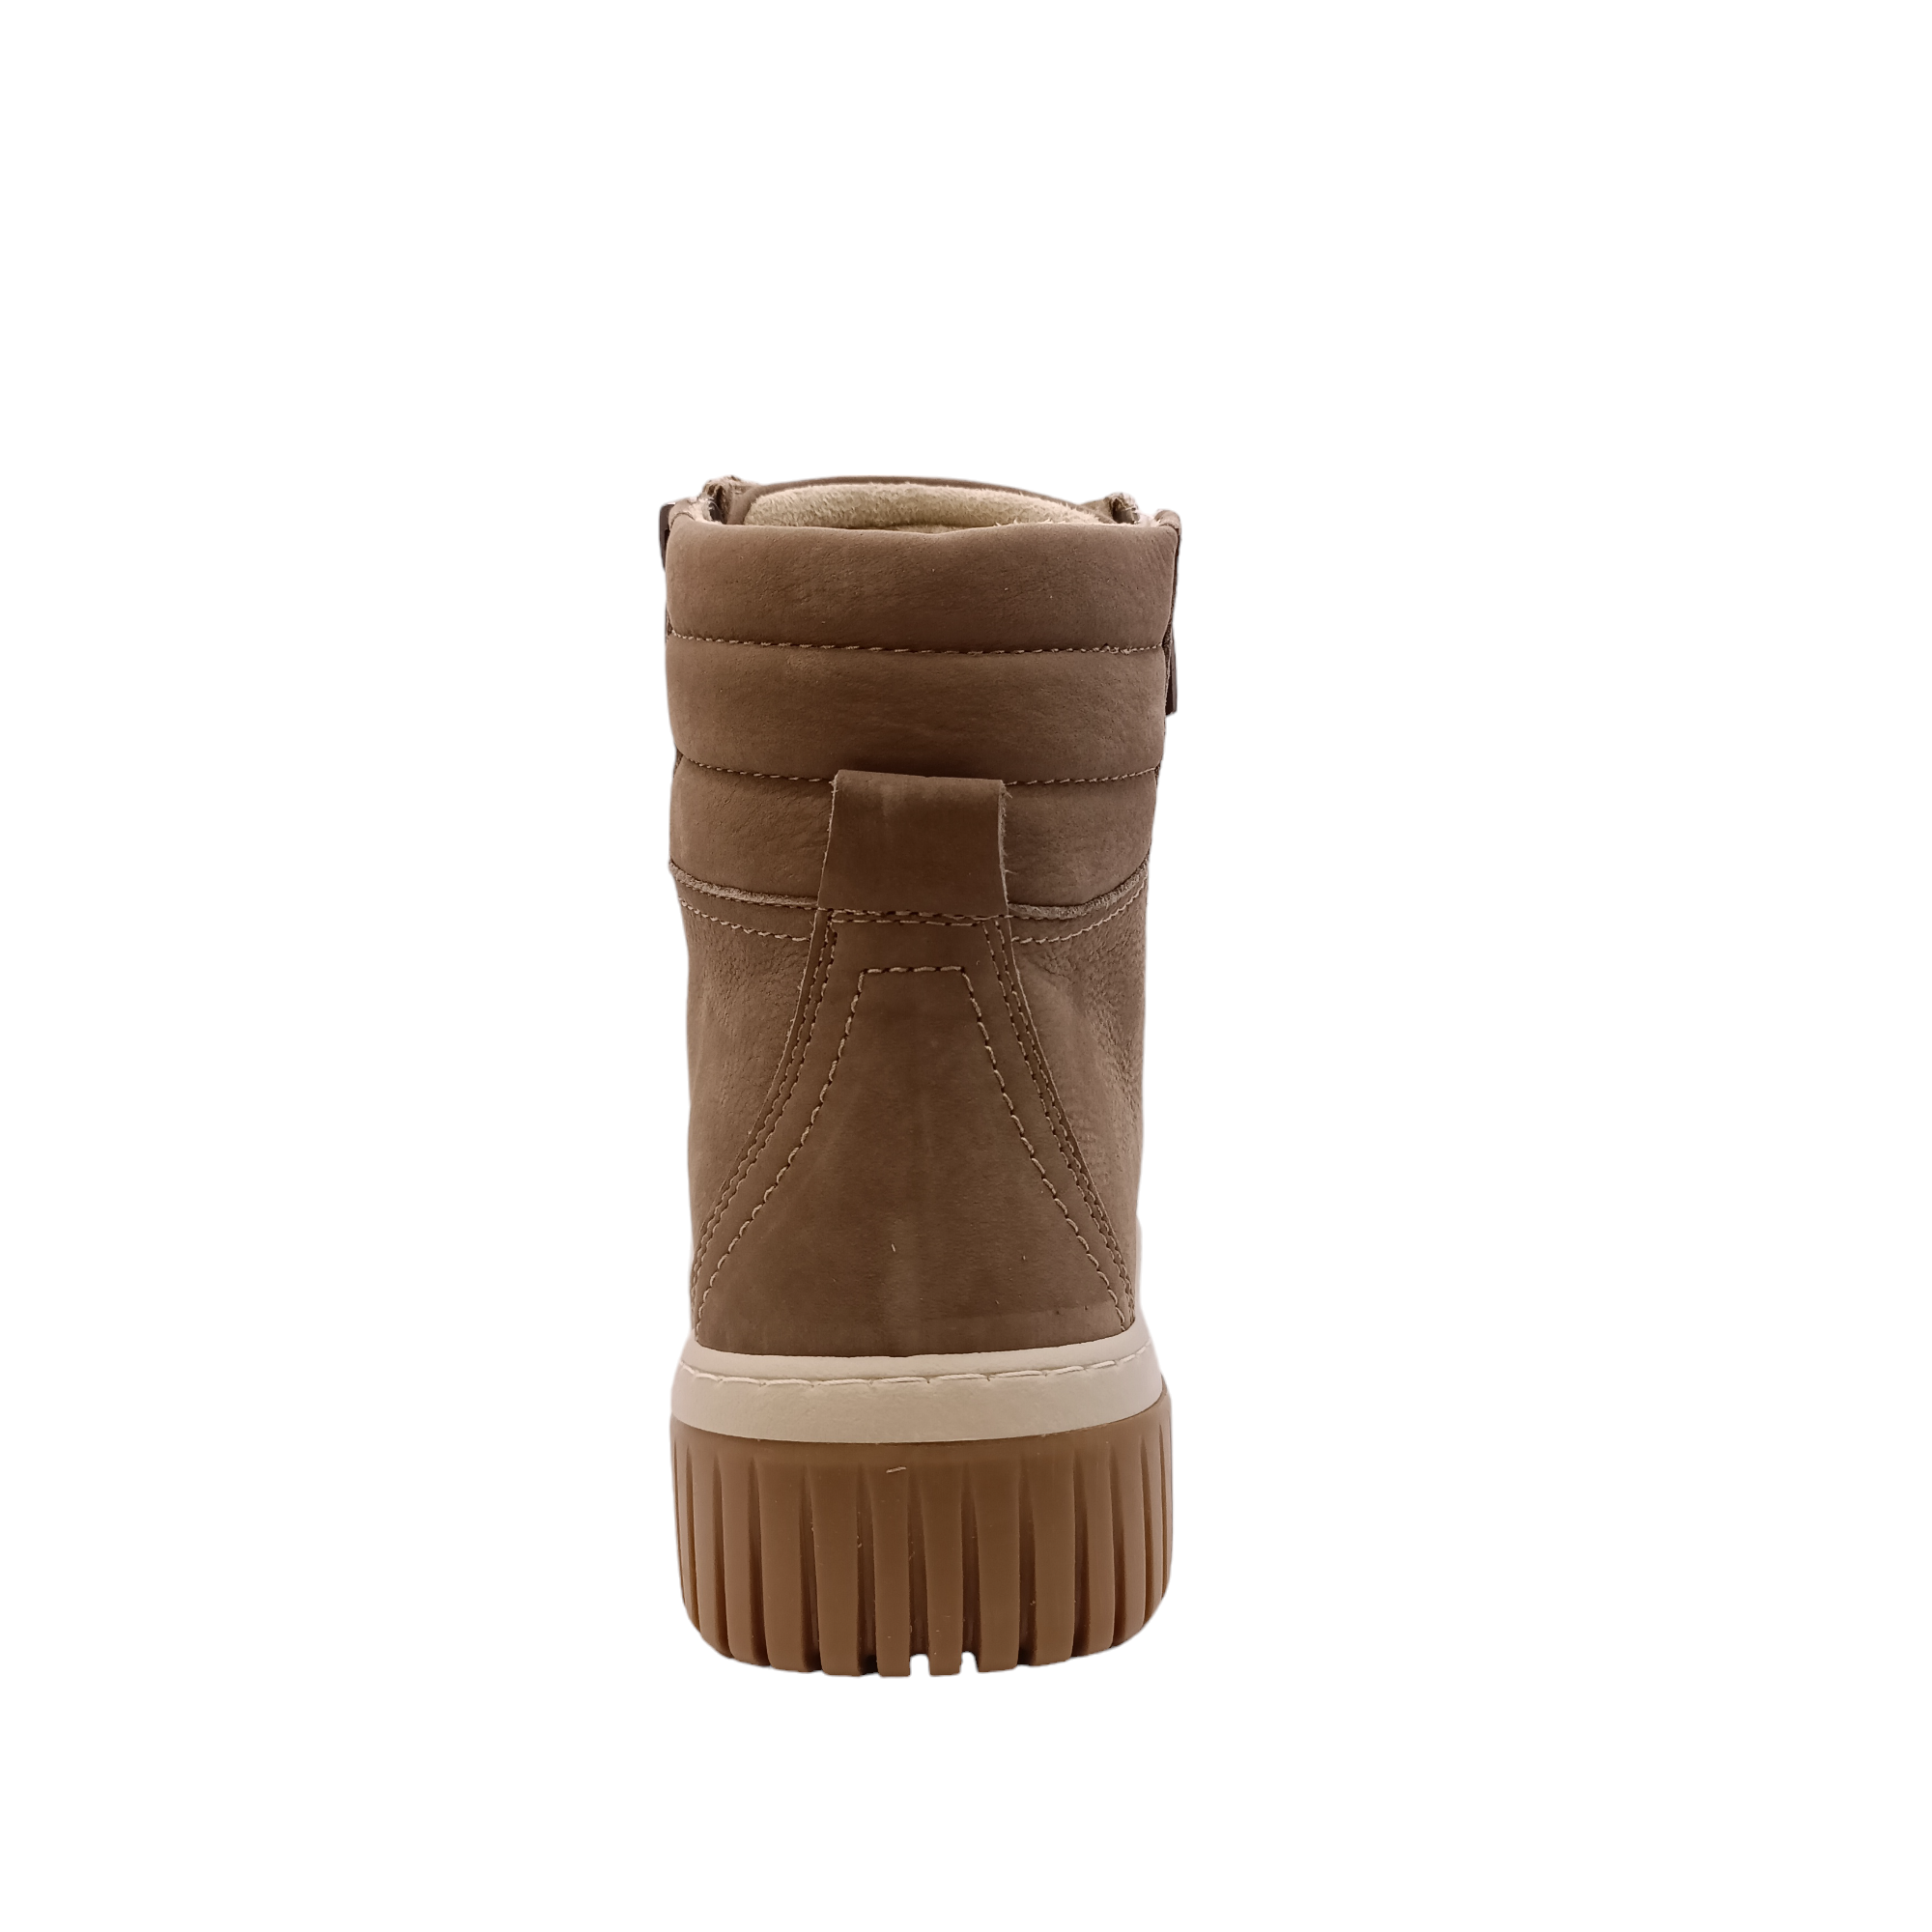 back view of the boot Petra from Cabello. Soft Turkish taupe coloured leather boot with side zip and light coloured sole and laces. Padded ankle with ruggered grip. Shop Womens Boots Online and In-store with shoe&amp;me Mount Maunganui Tauranga NZ.